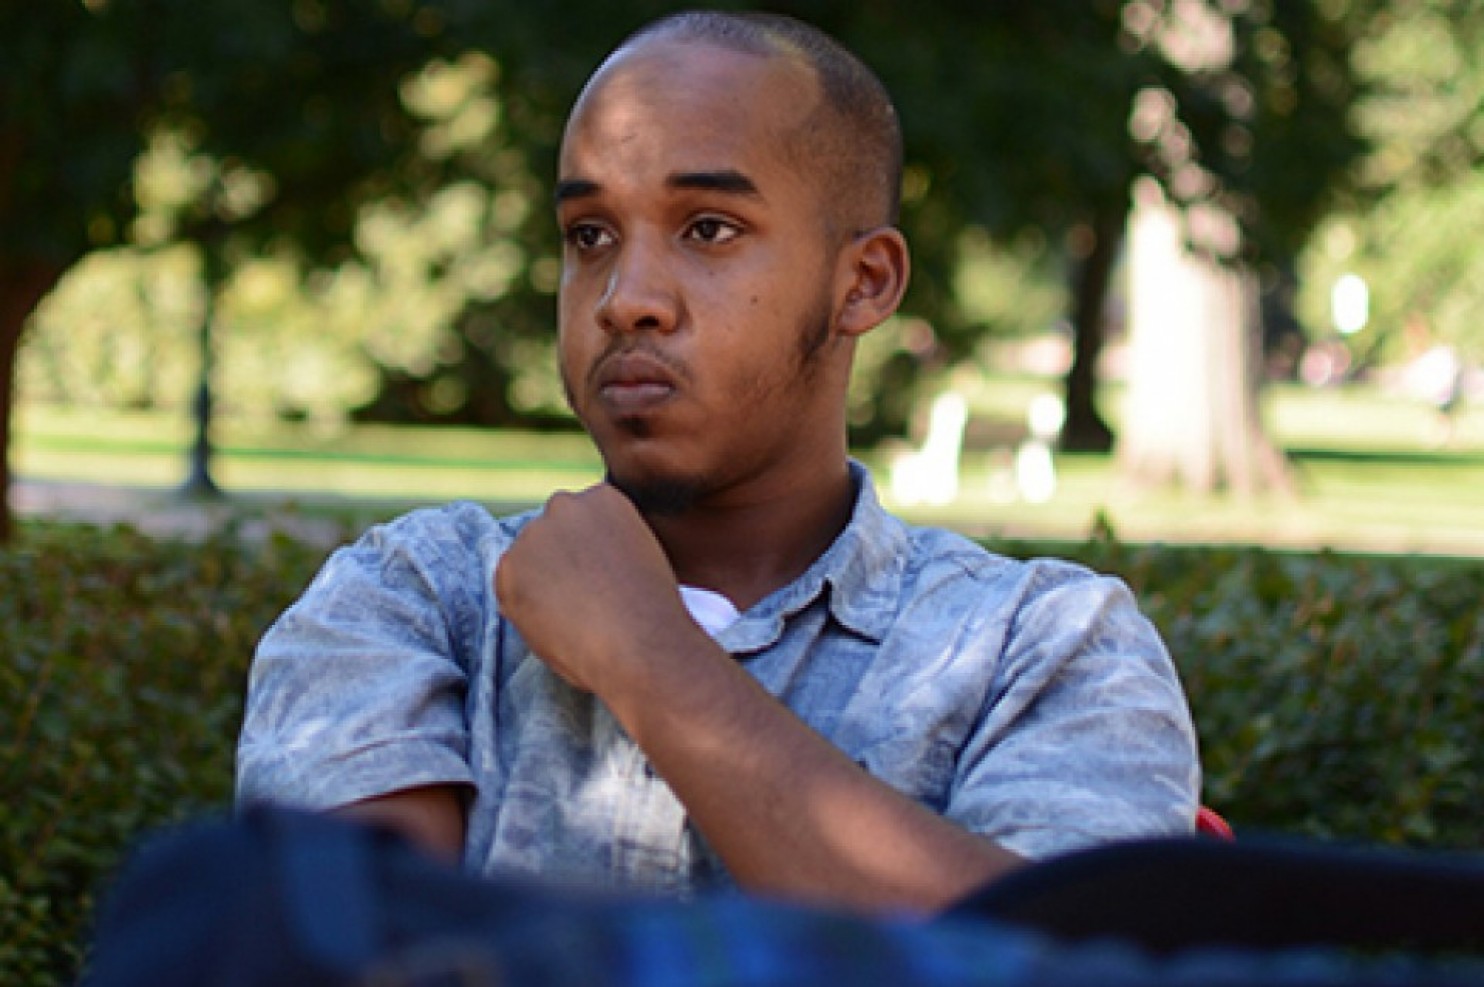  Ohio State attacker complained bitterly in Facebook post of treatment of Muslims ‘everywhere,’ reports say 